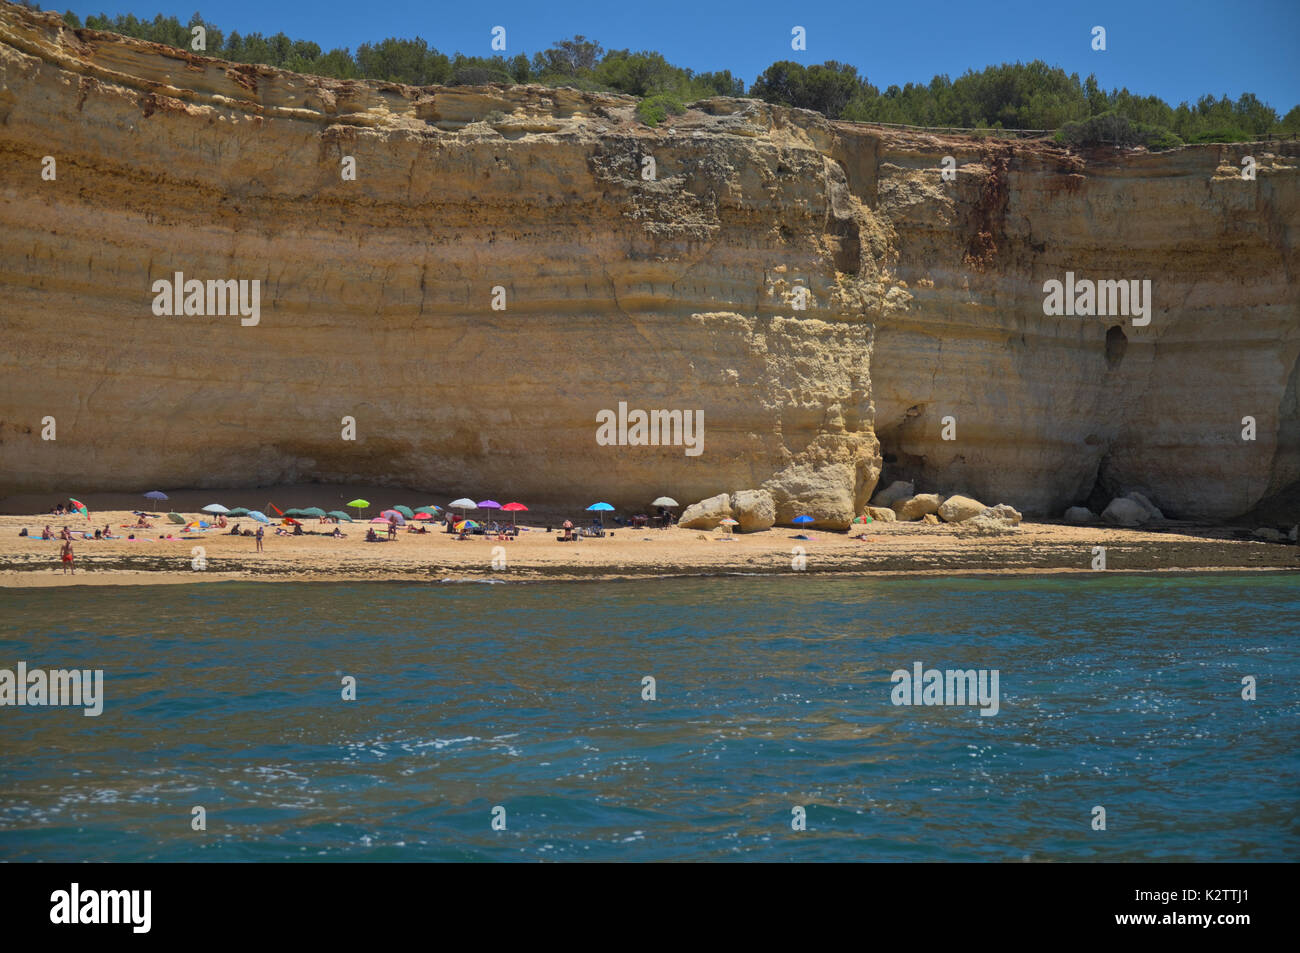 Boat tour near Carvoeiro, in Algarve, Portugal. Travel and vacation destinations Stock Photo